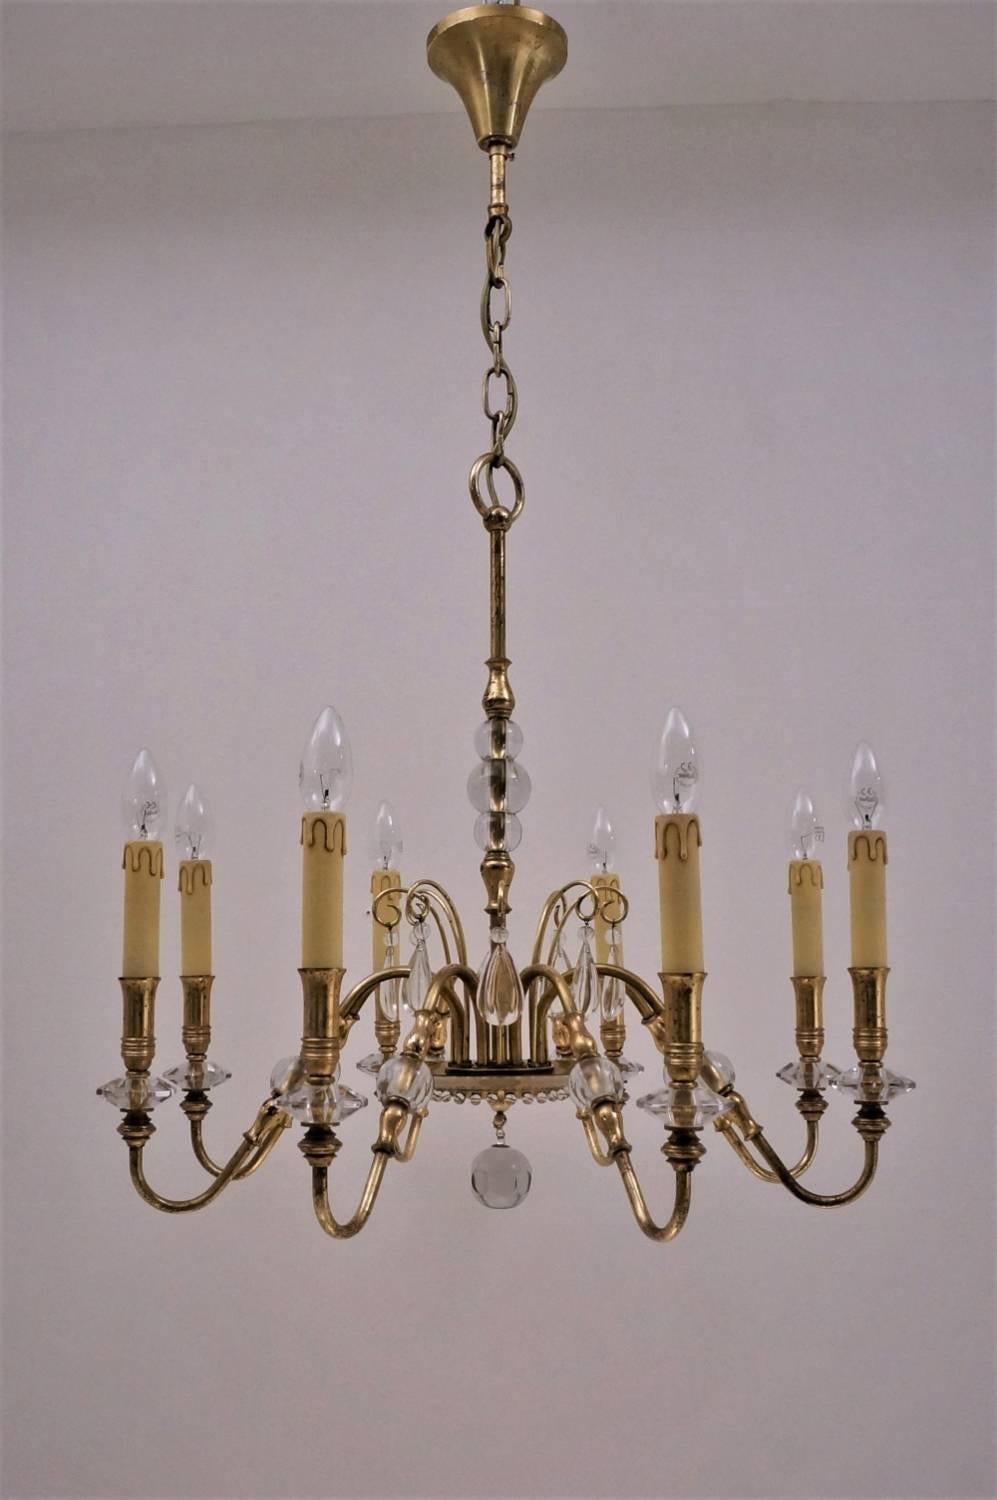 Maison Bagues Style Chandelier, Bronze and Crystal, French, circa 1940s For Sale 1